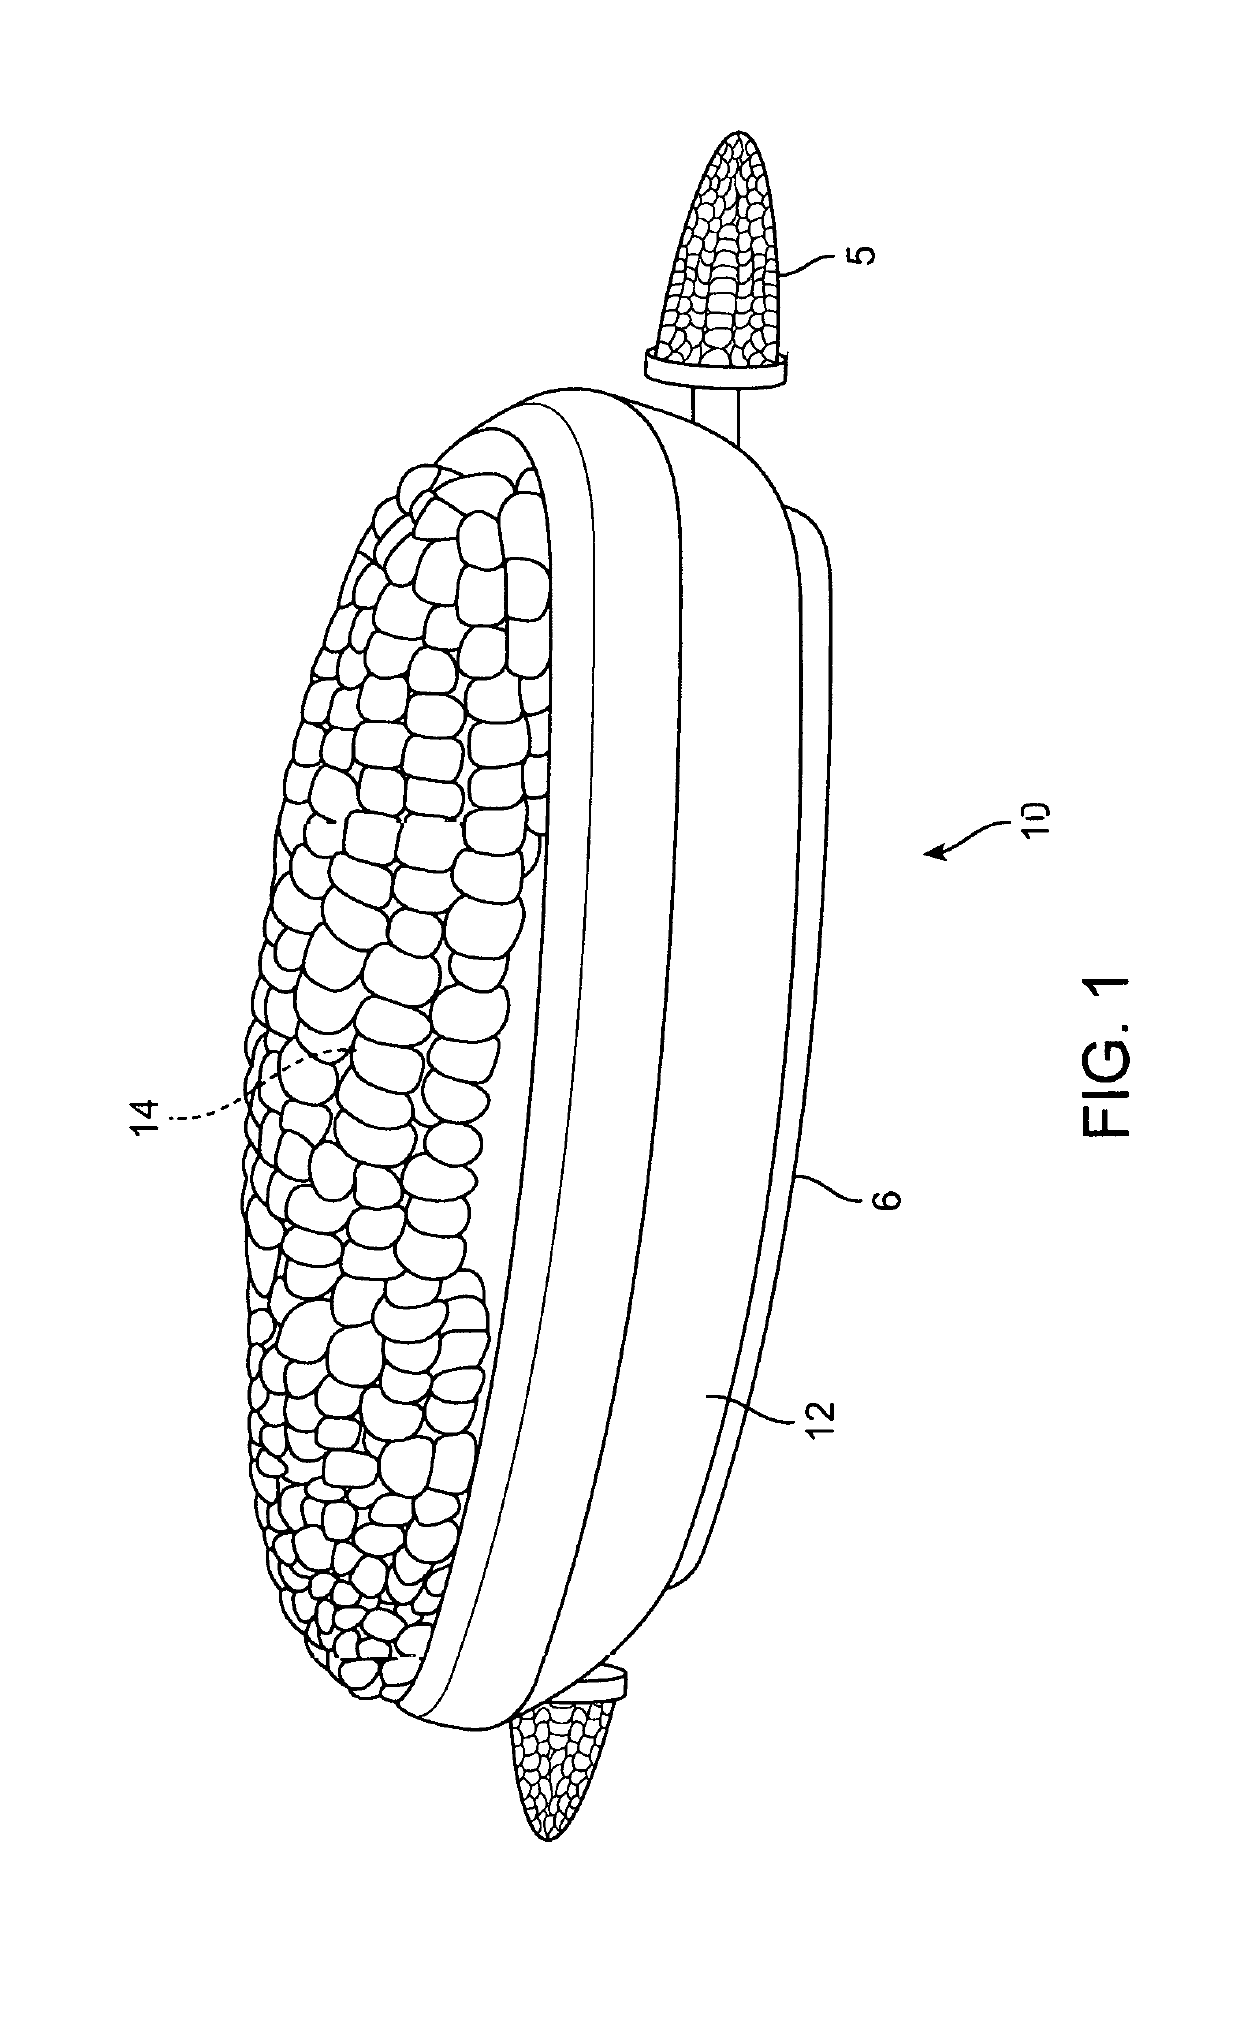 Manual device for maxdimizing application of butter to an ear of corn